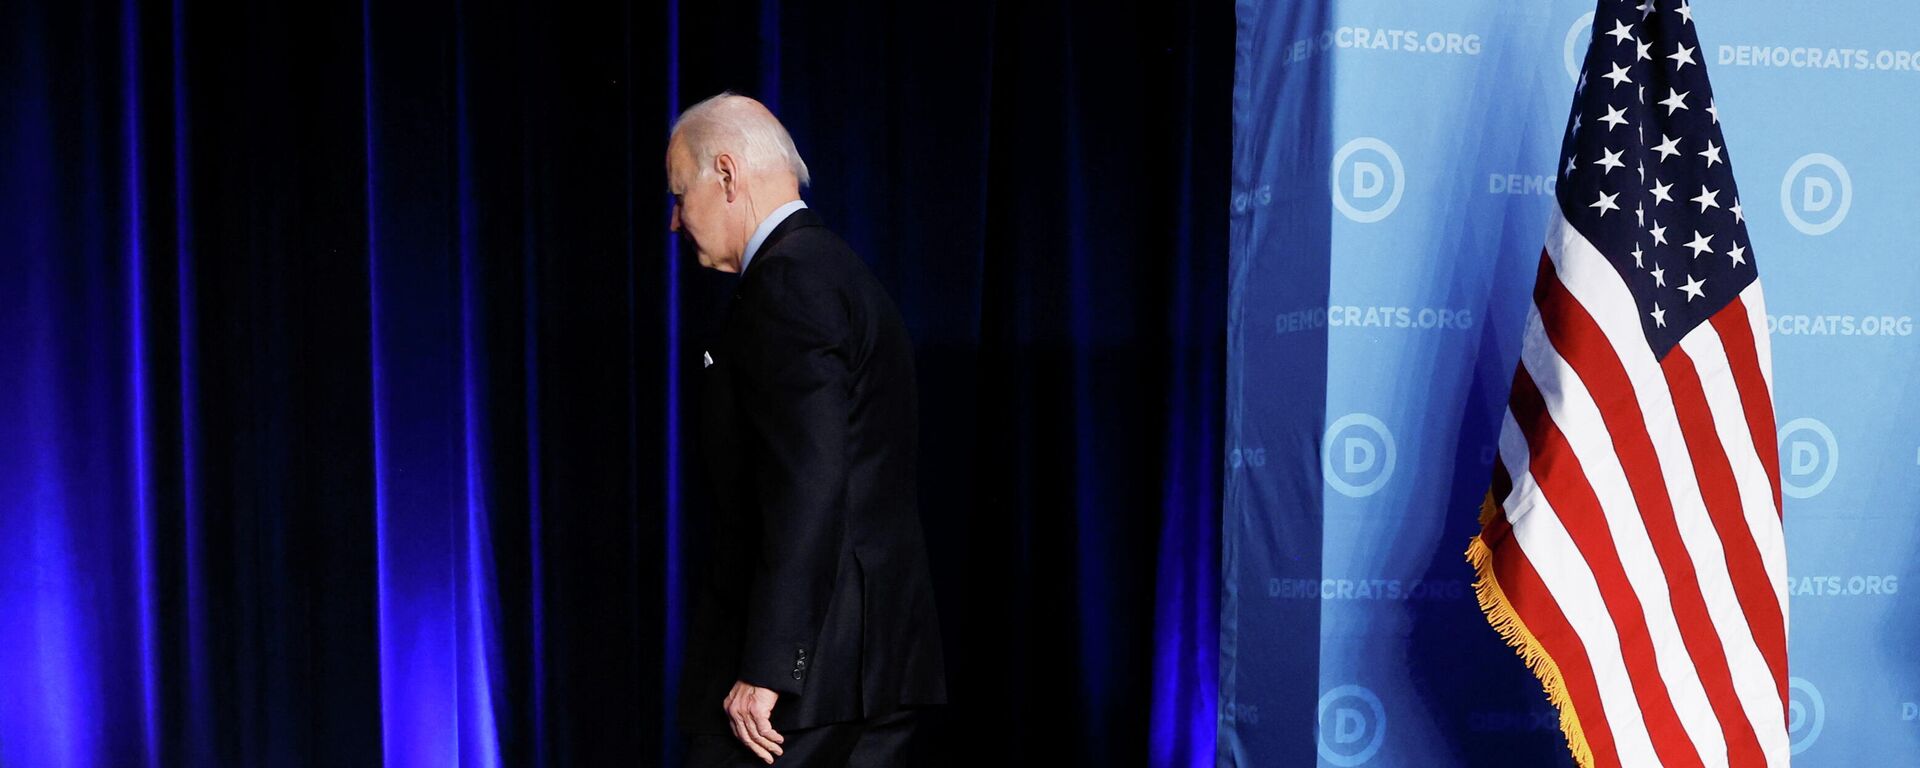 U.S. President Joe Biden leaves the stage after delivering remarks to the Democratic National Committee (DNC) Winter Meeting in Washington, U.S., March 10, 2022 - Sputnik International, 1920, 11.03.2022